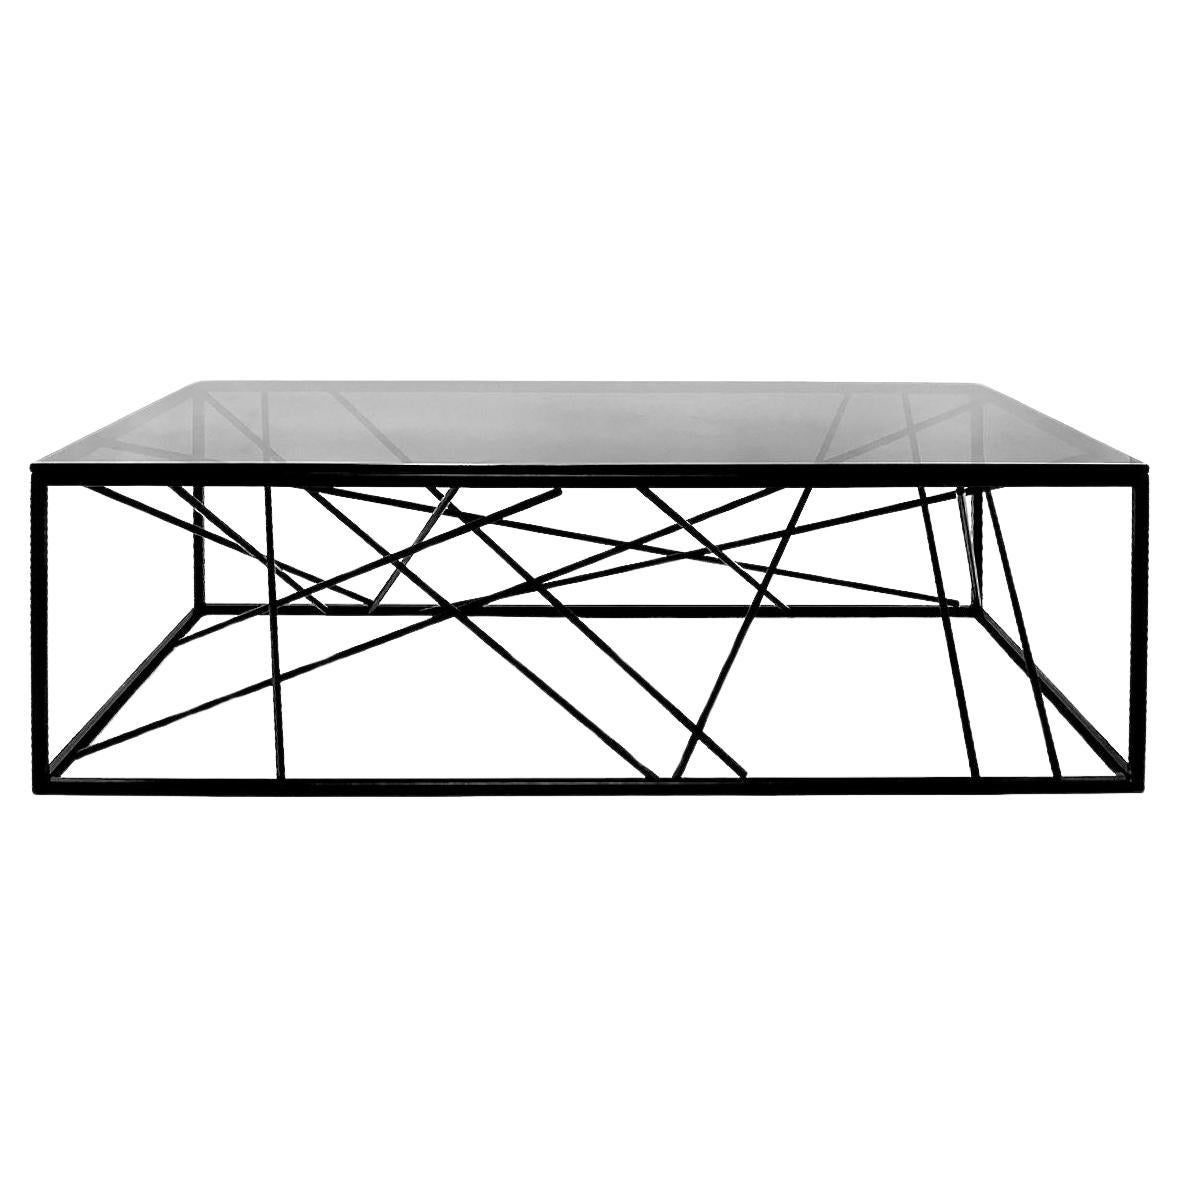 Nest Coffee Table by Morgan Clayhall, sculptural, steel, glass, custom For Sale